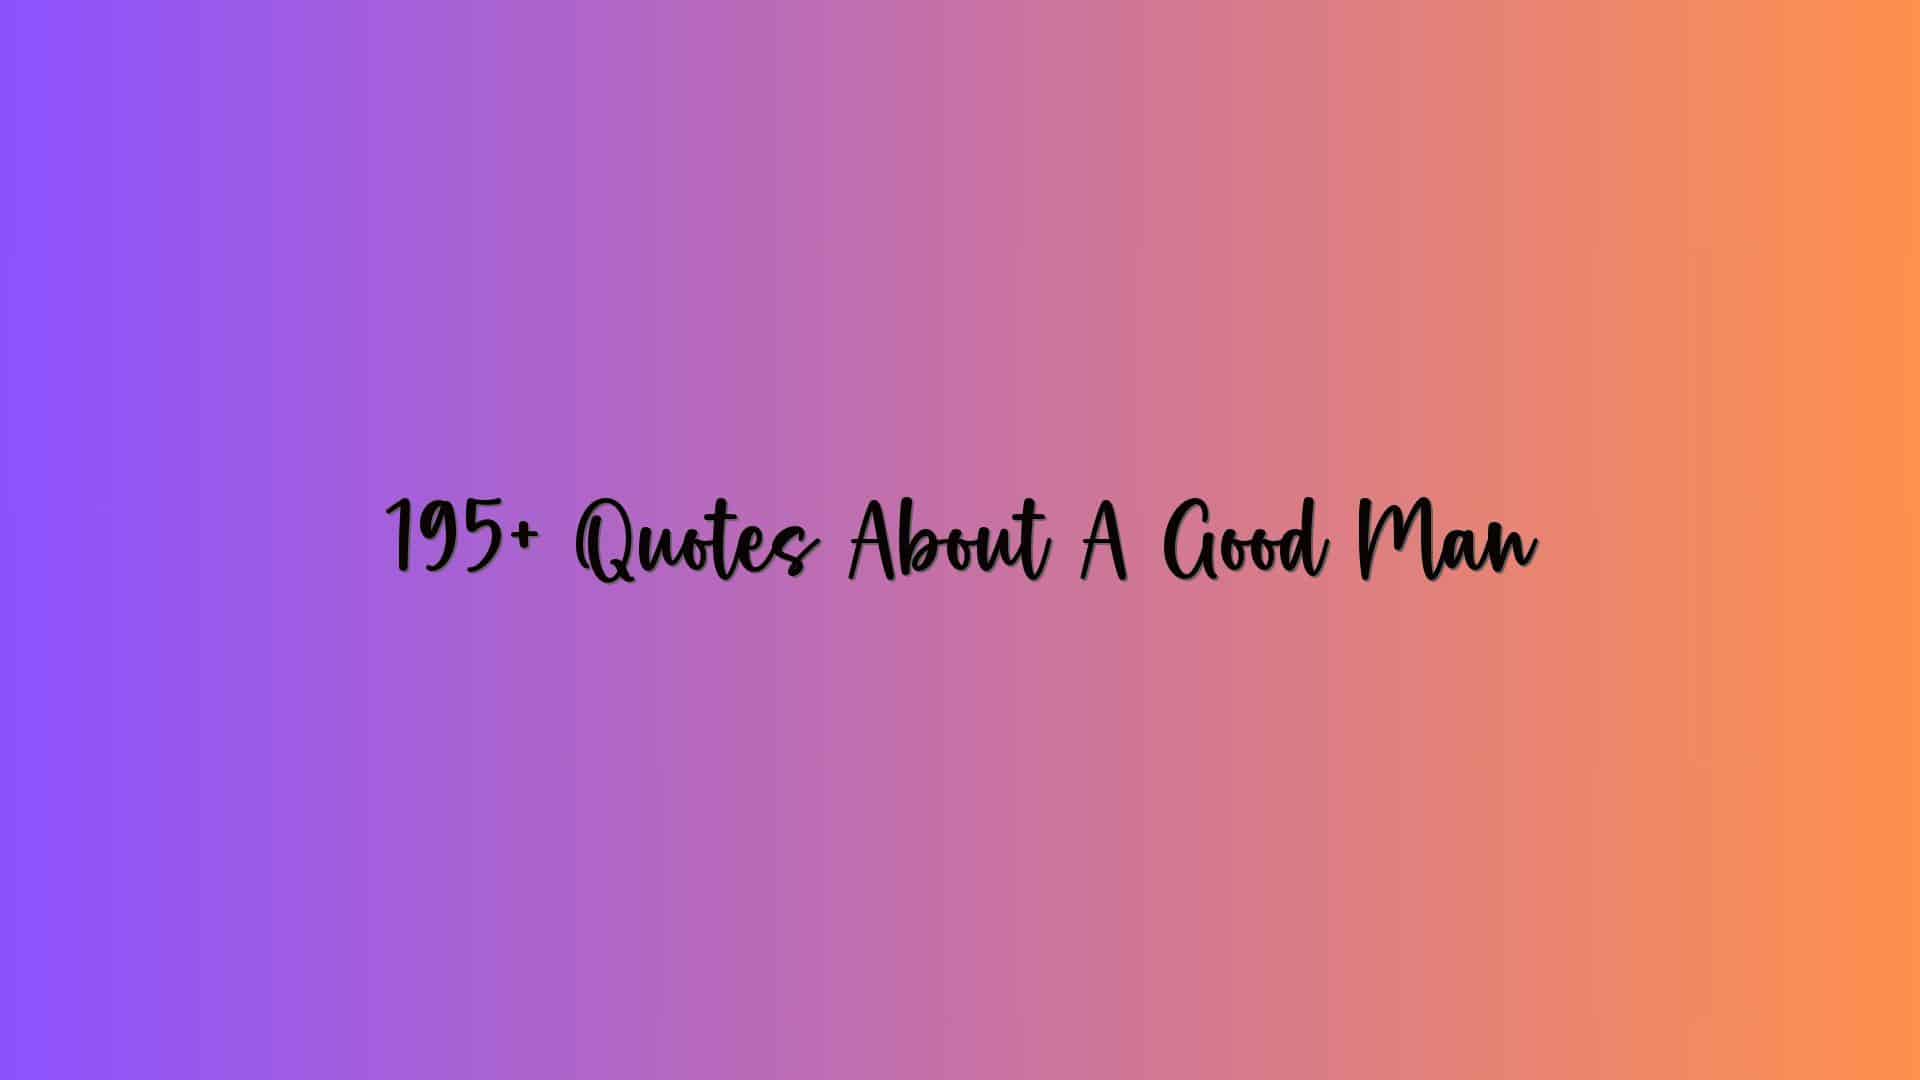 195+ Quotes About A Good Man